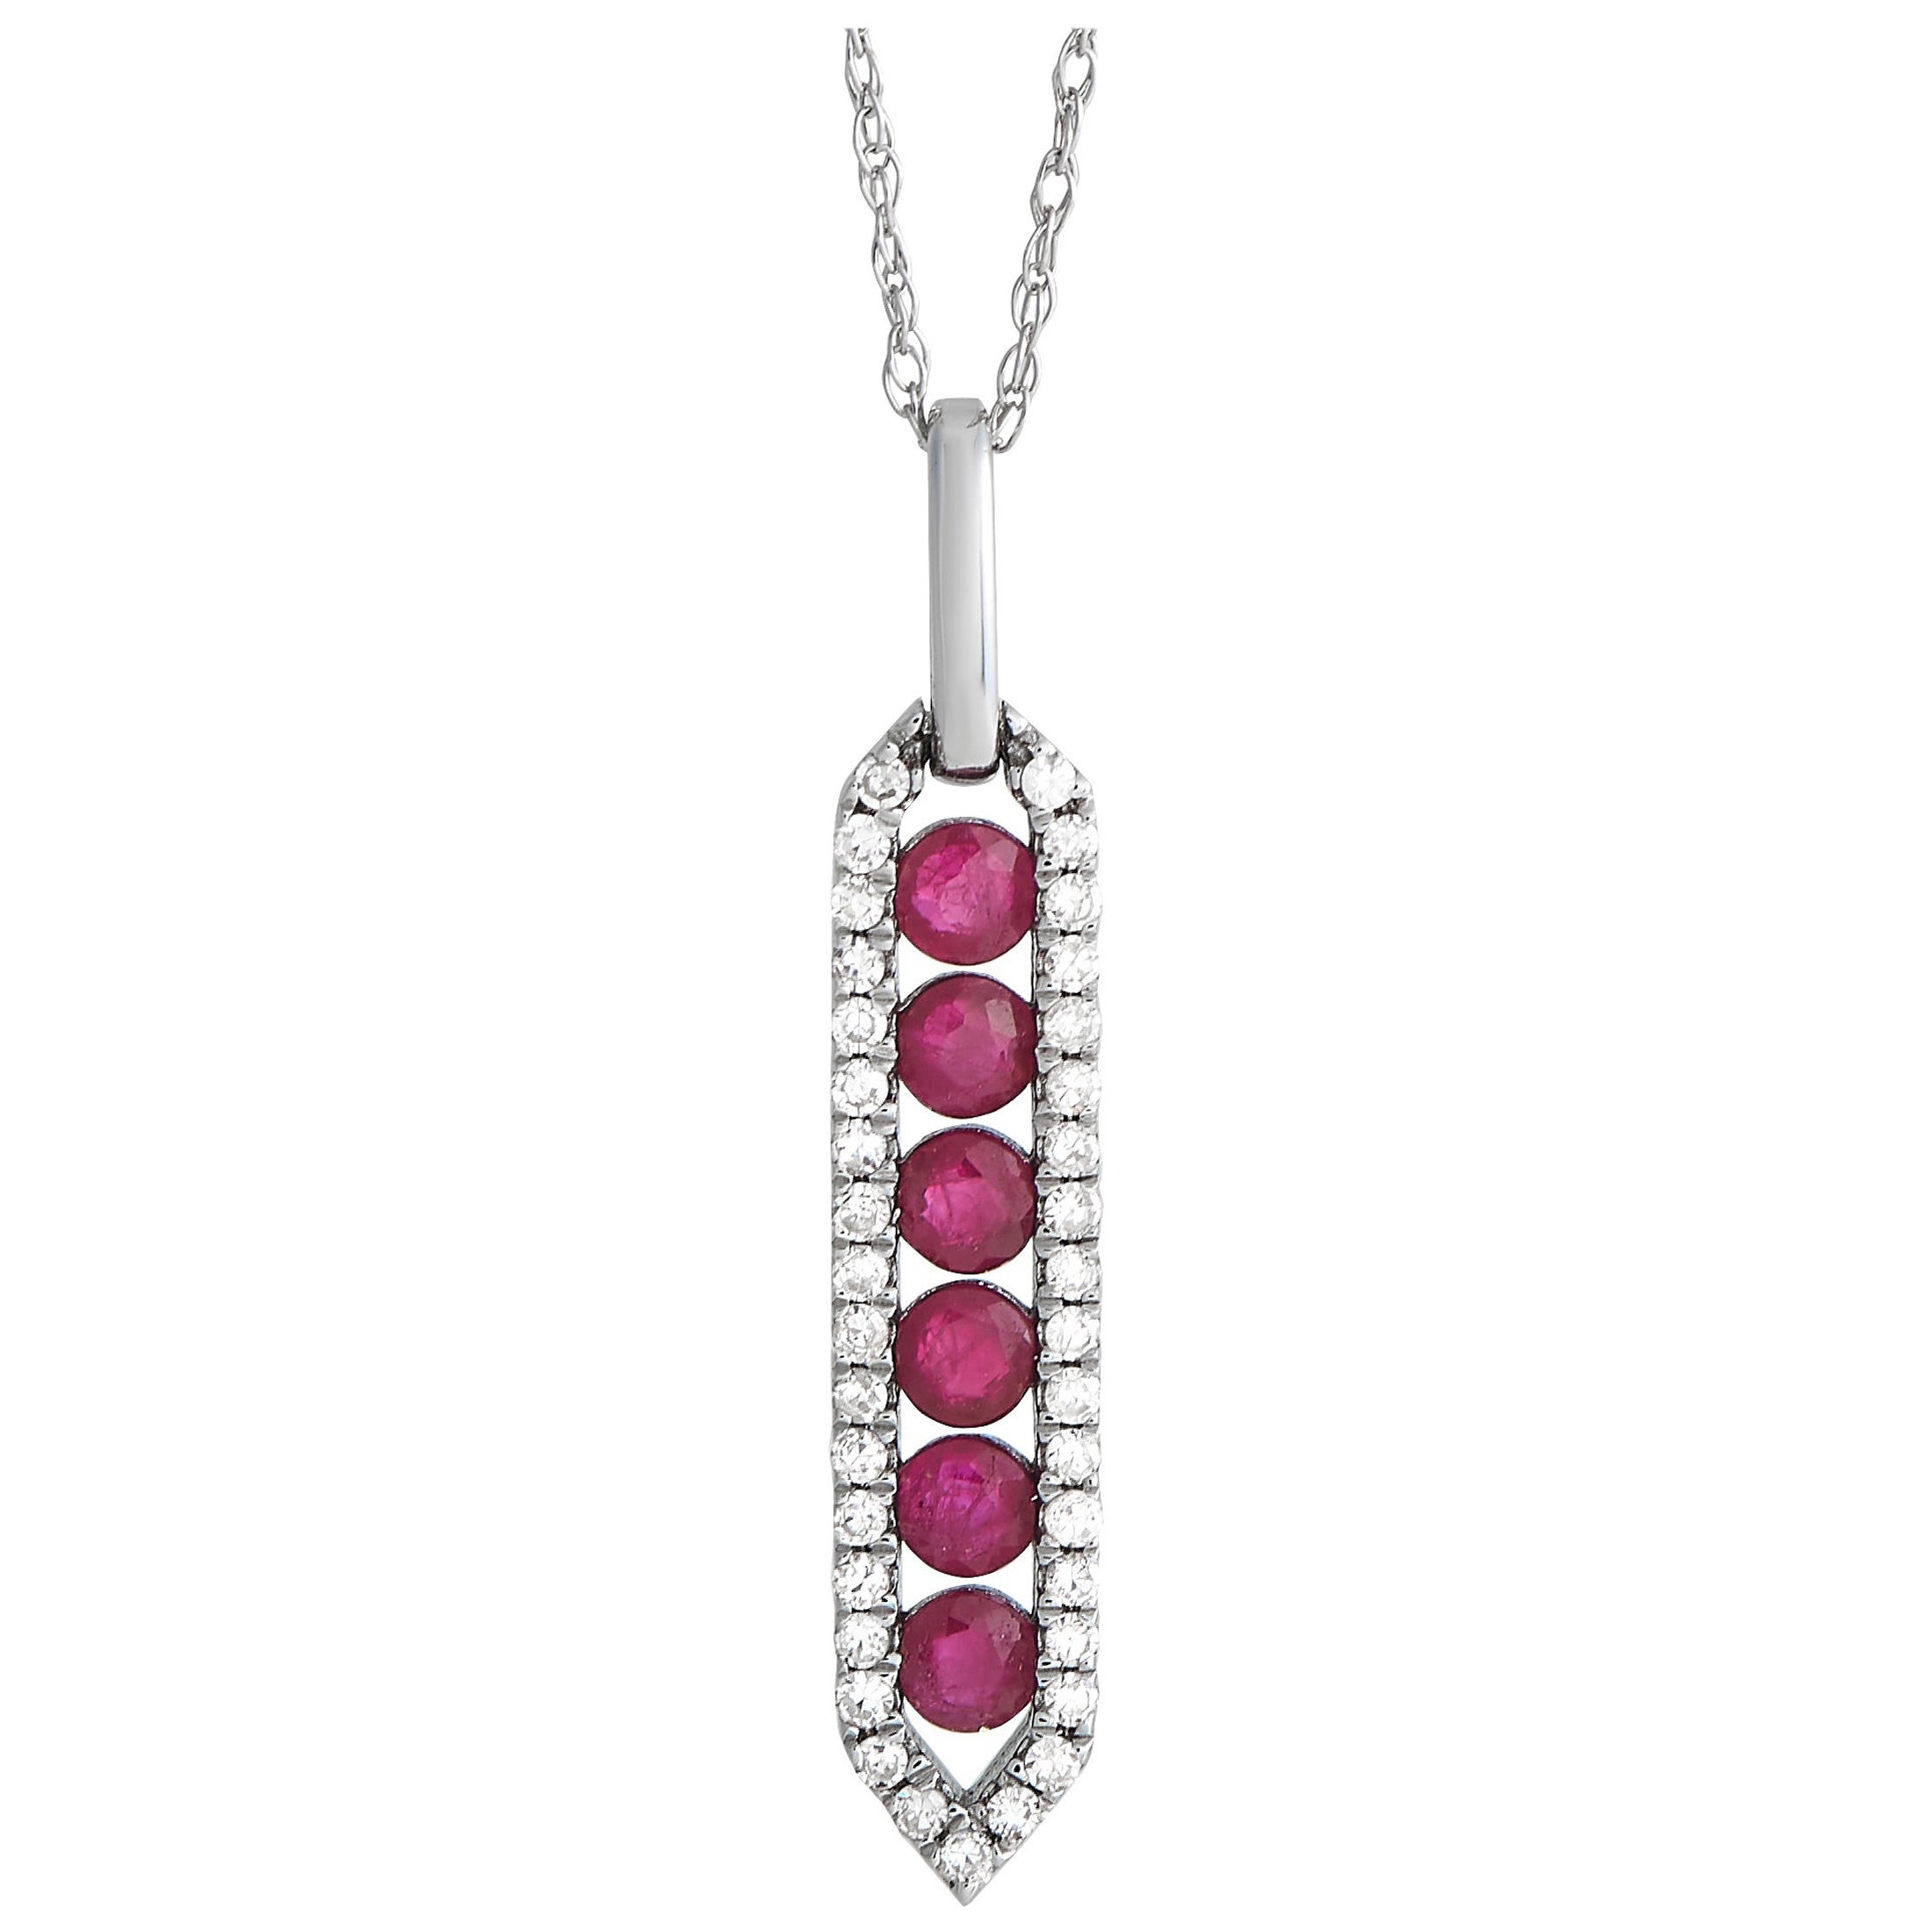 LB Exclusive 14K White Gold 0.16ct Diamond & Ruby Pendant Necklace PD4-15752WRU For Sale